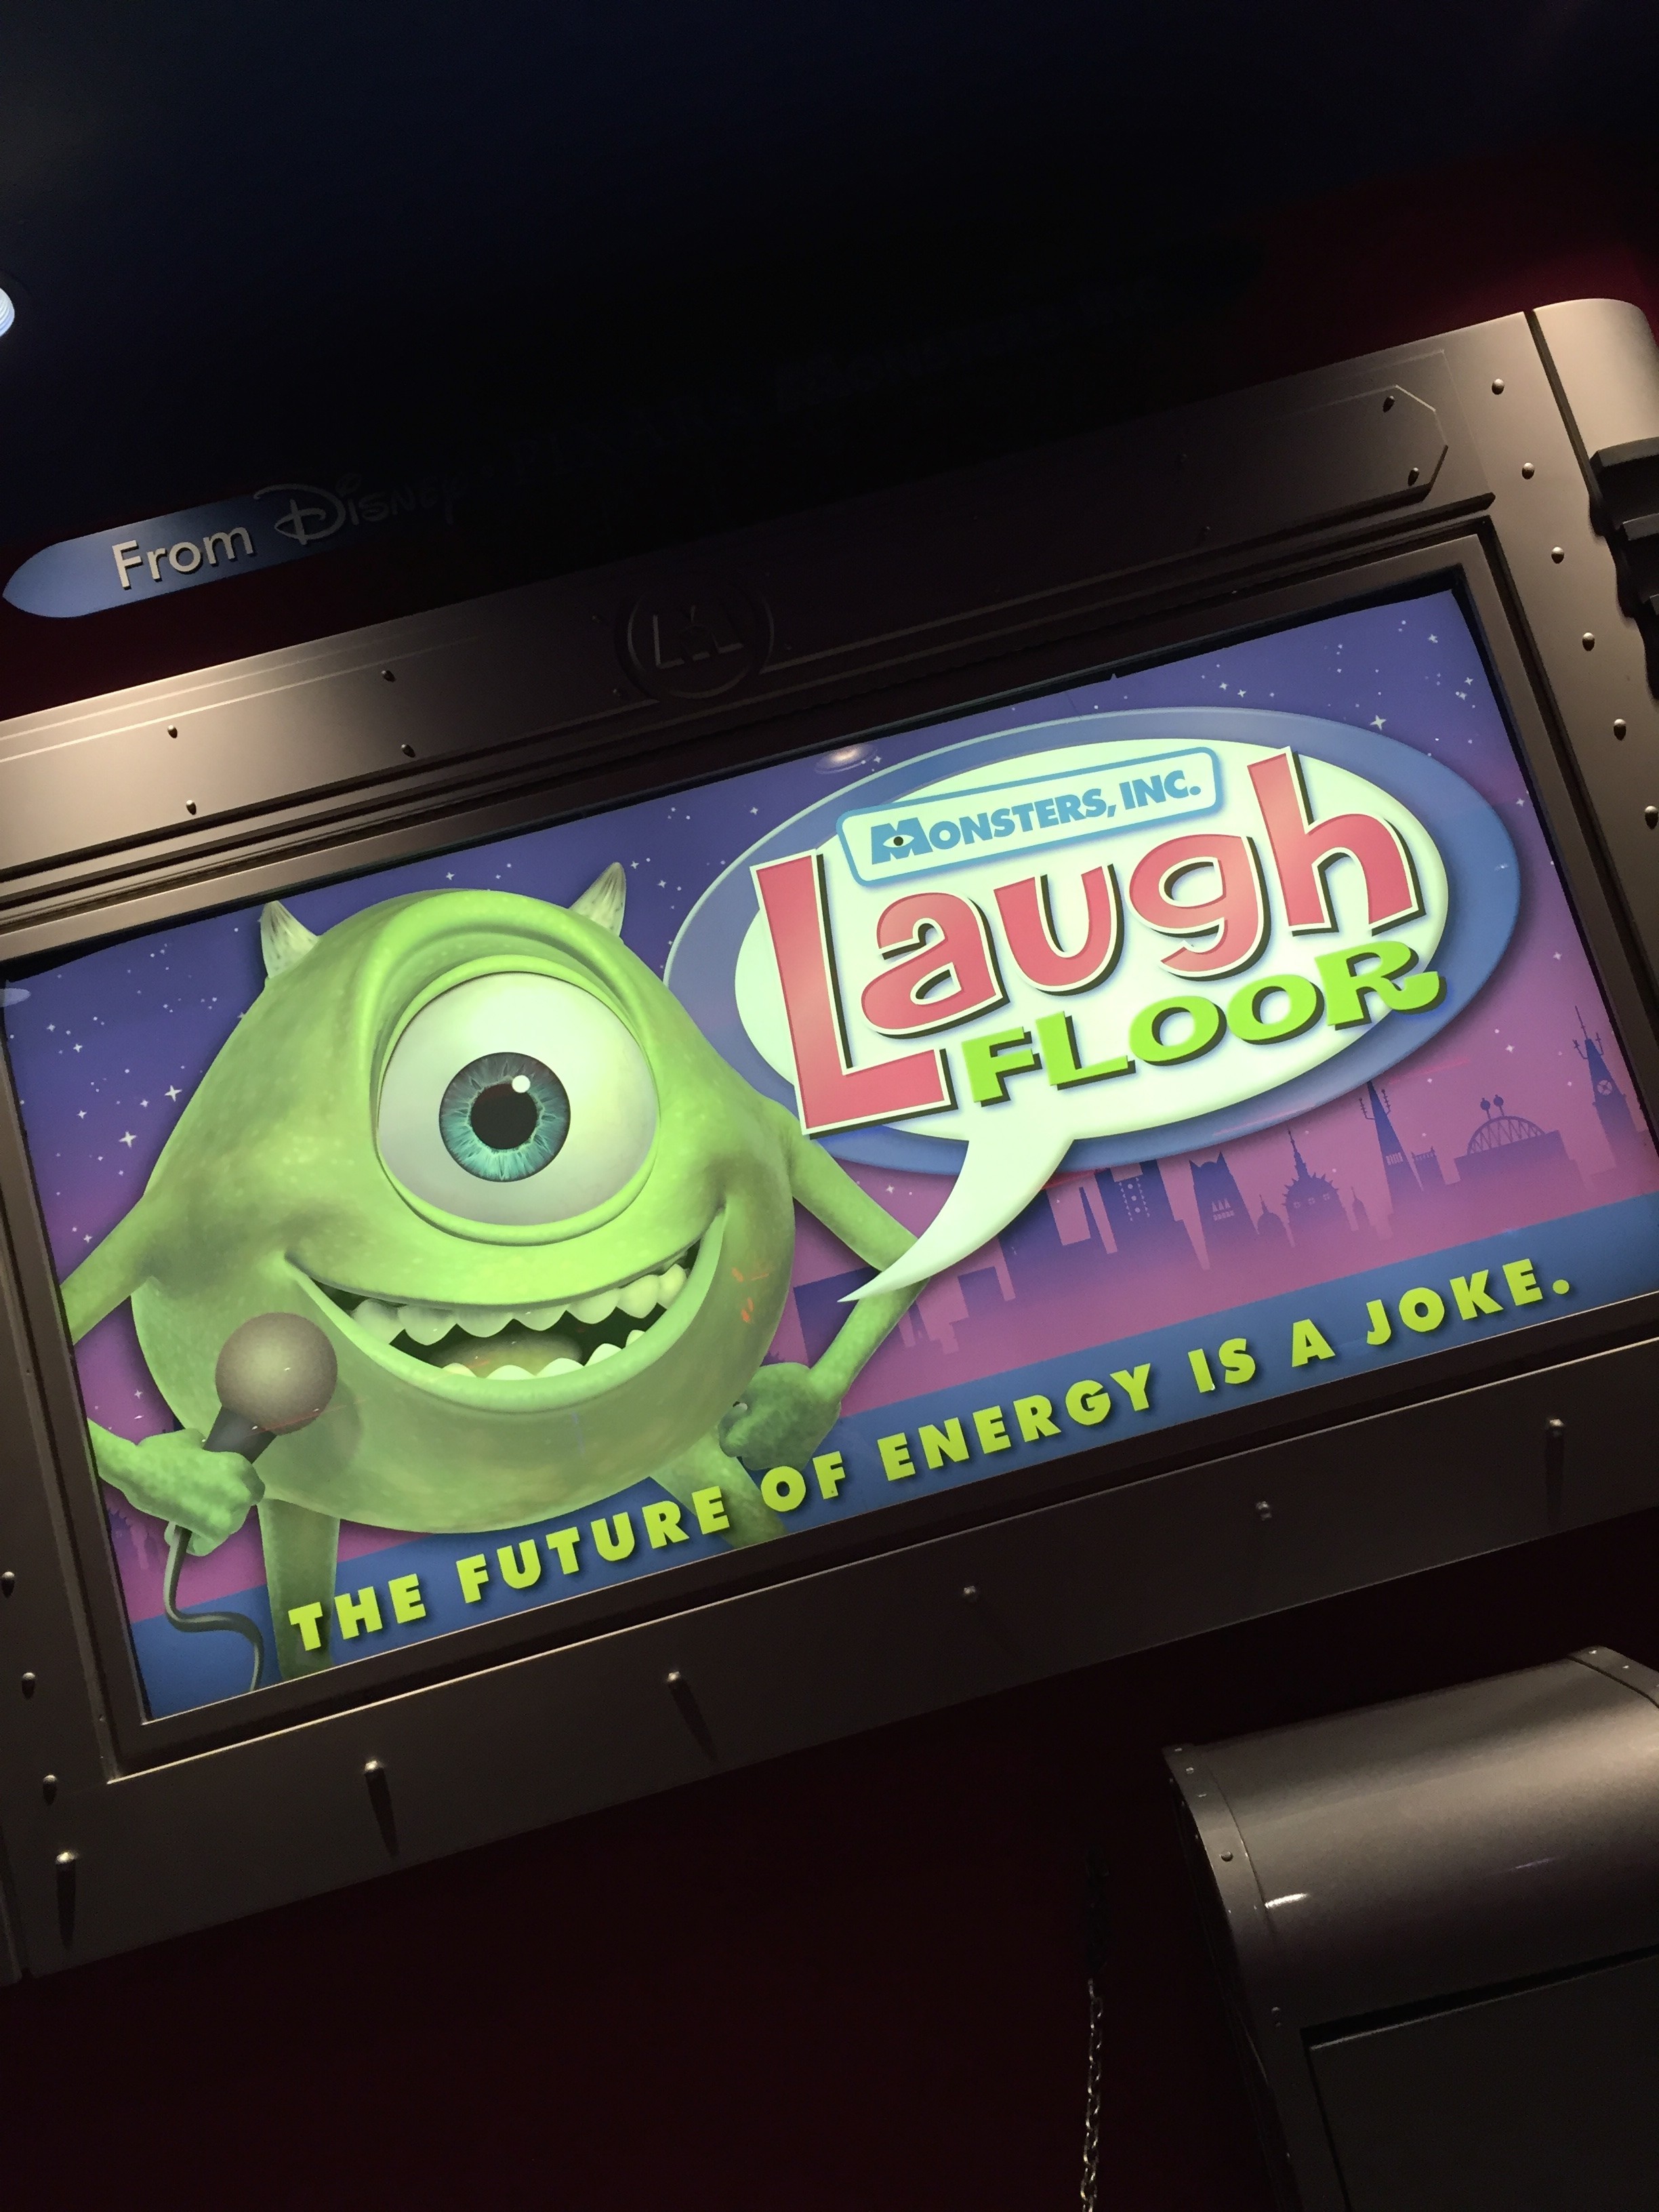 Everything You Need to Know About Monsters, Inc. Laugh Floor